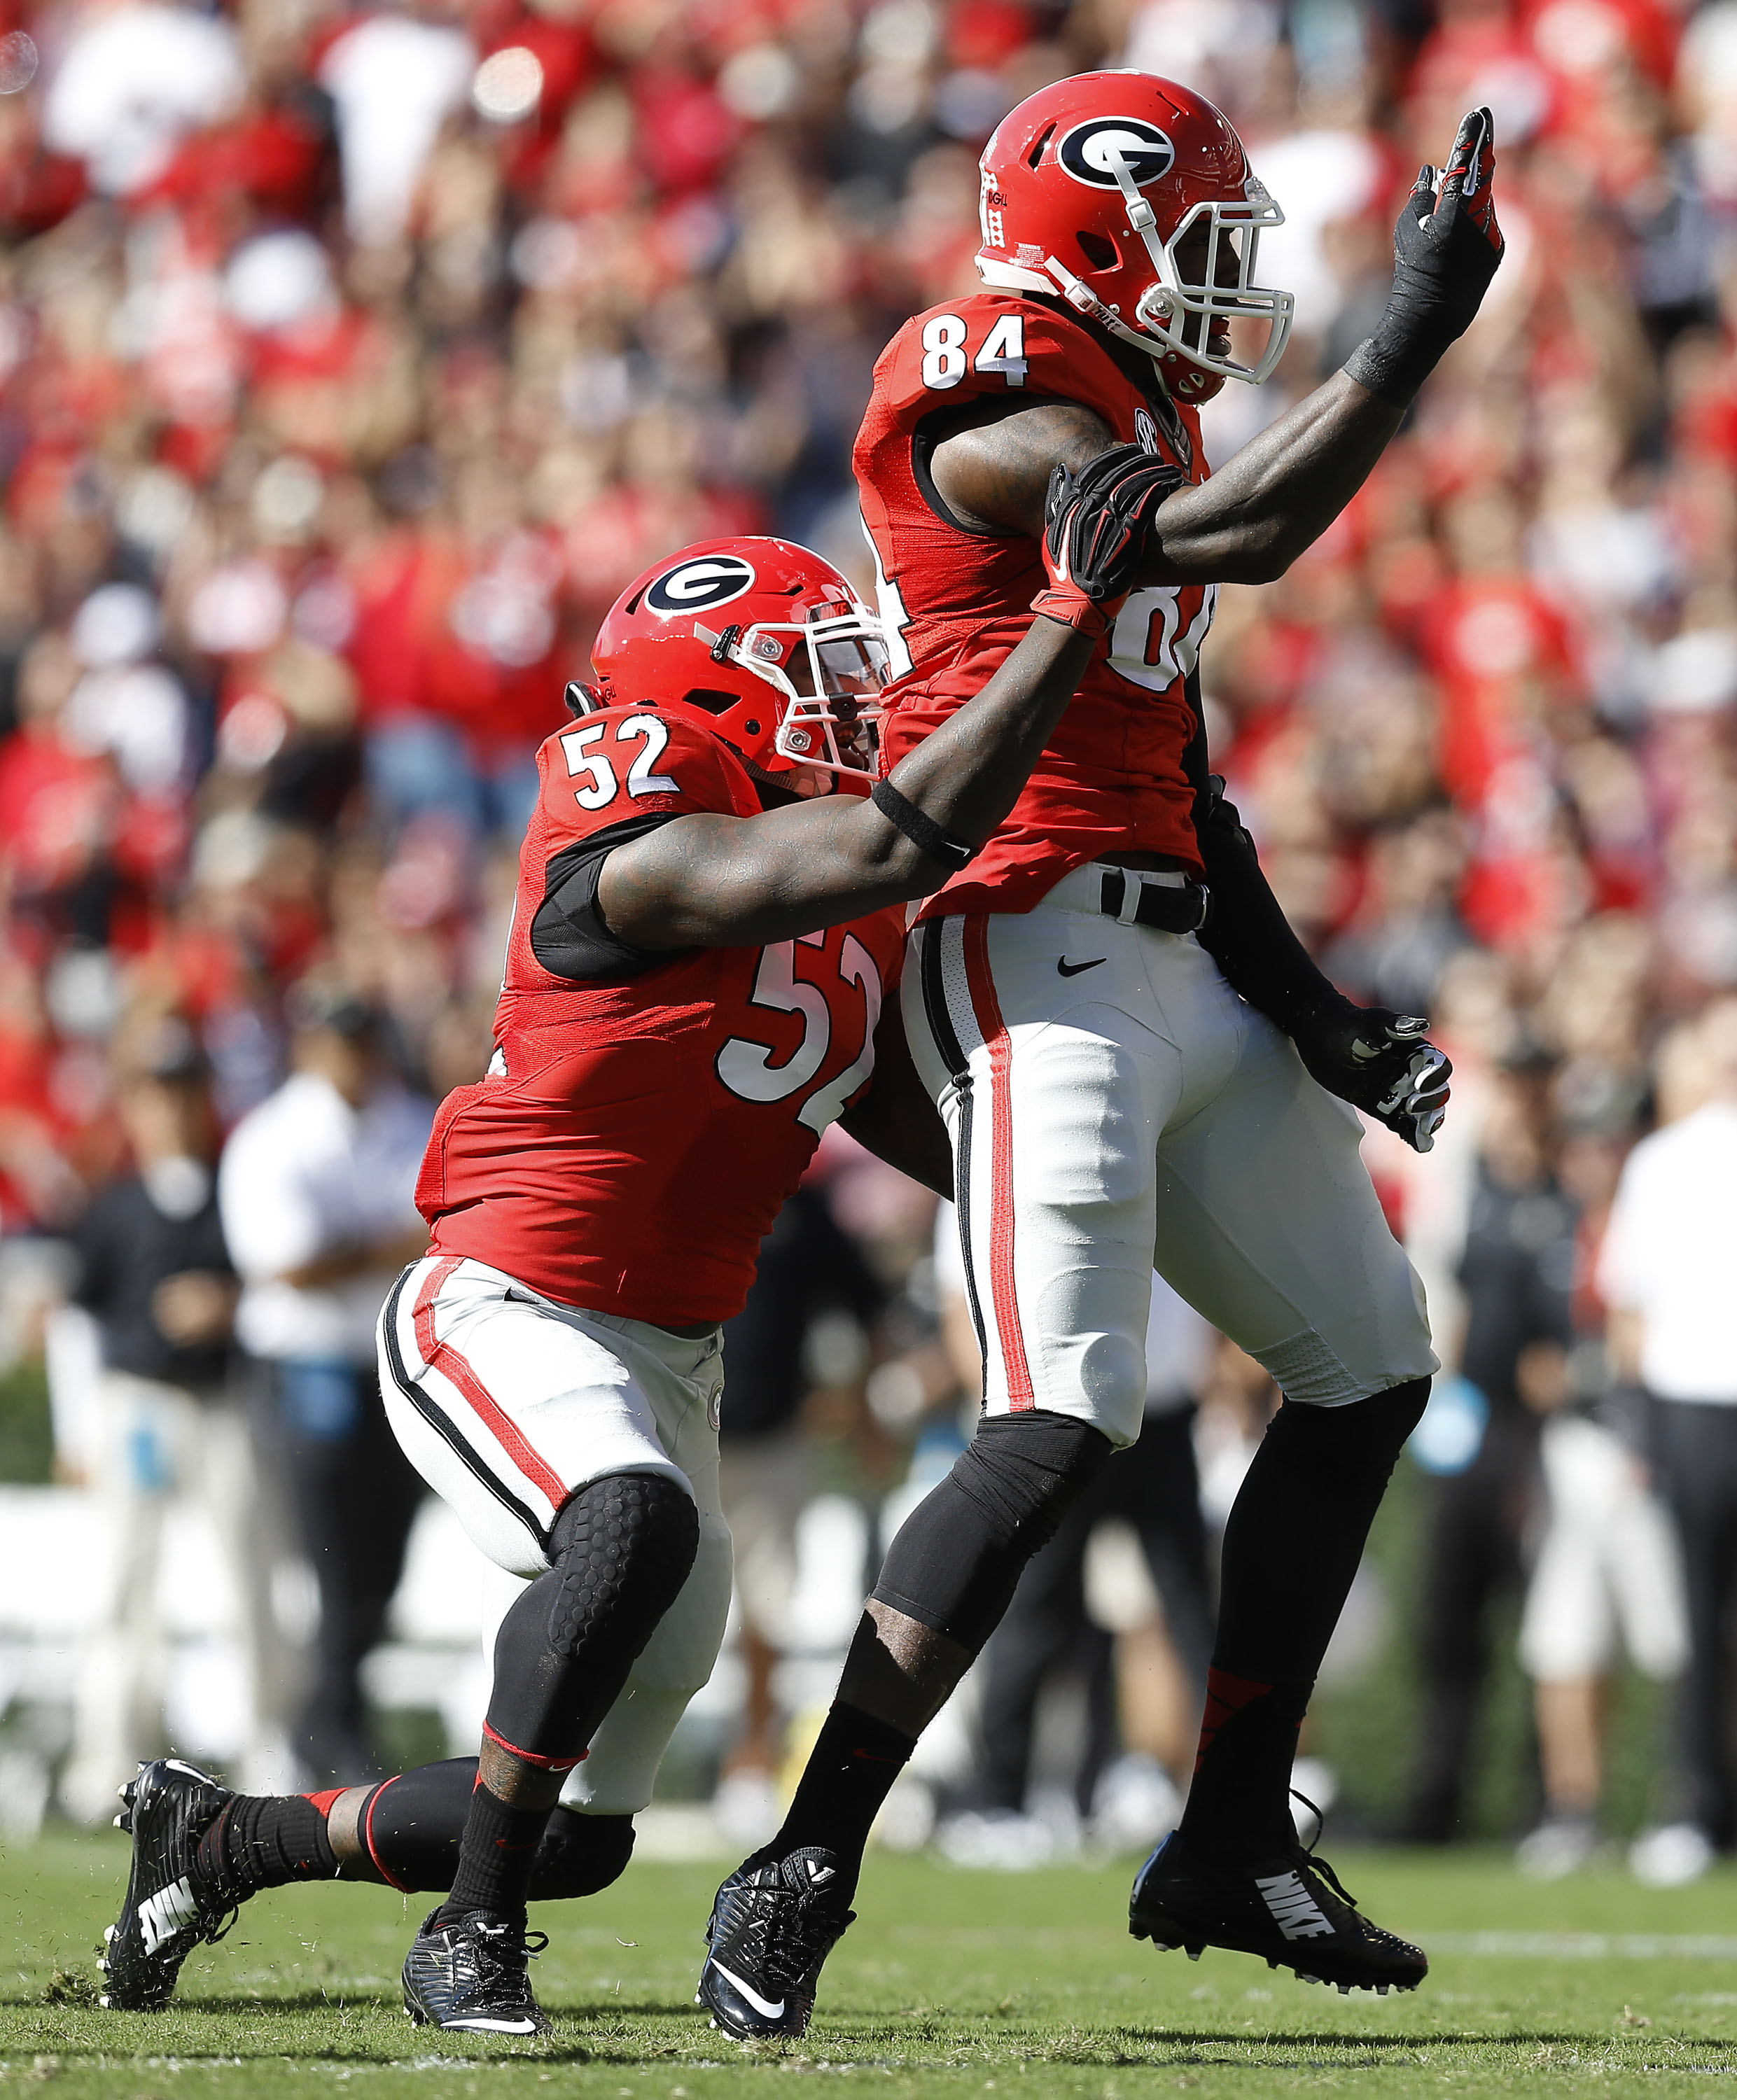 ATHENS, GA - OCTOBER 04:  Linebackers Amarlo Herrera #52 and Leonard Floyd of the Georgia Bulldogs celebrate after a sack during the game against the Vanderbilt Commodores at Sanford Stadium on October 4, 2014 in Athens, Georgia.  (Credit: Mike Zarrilli/Getty Images)